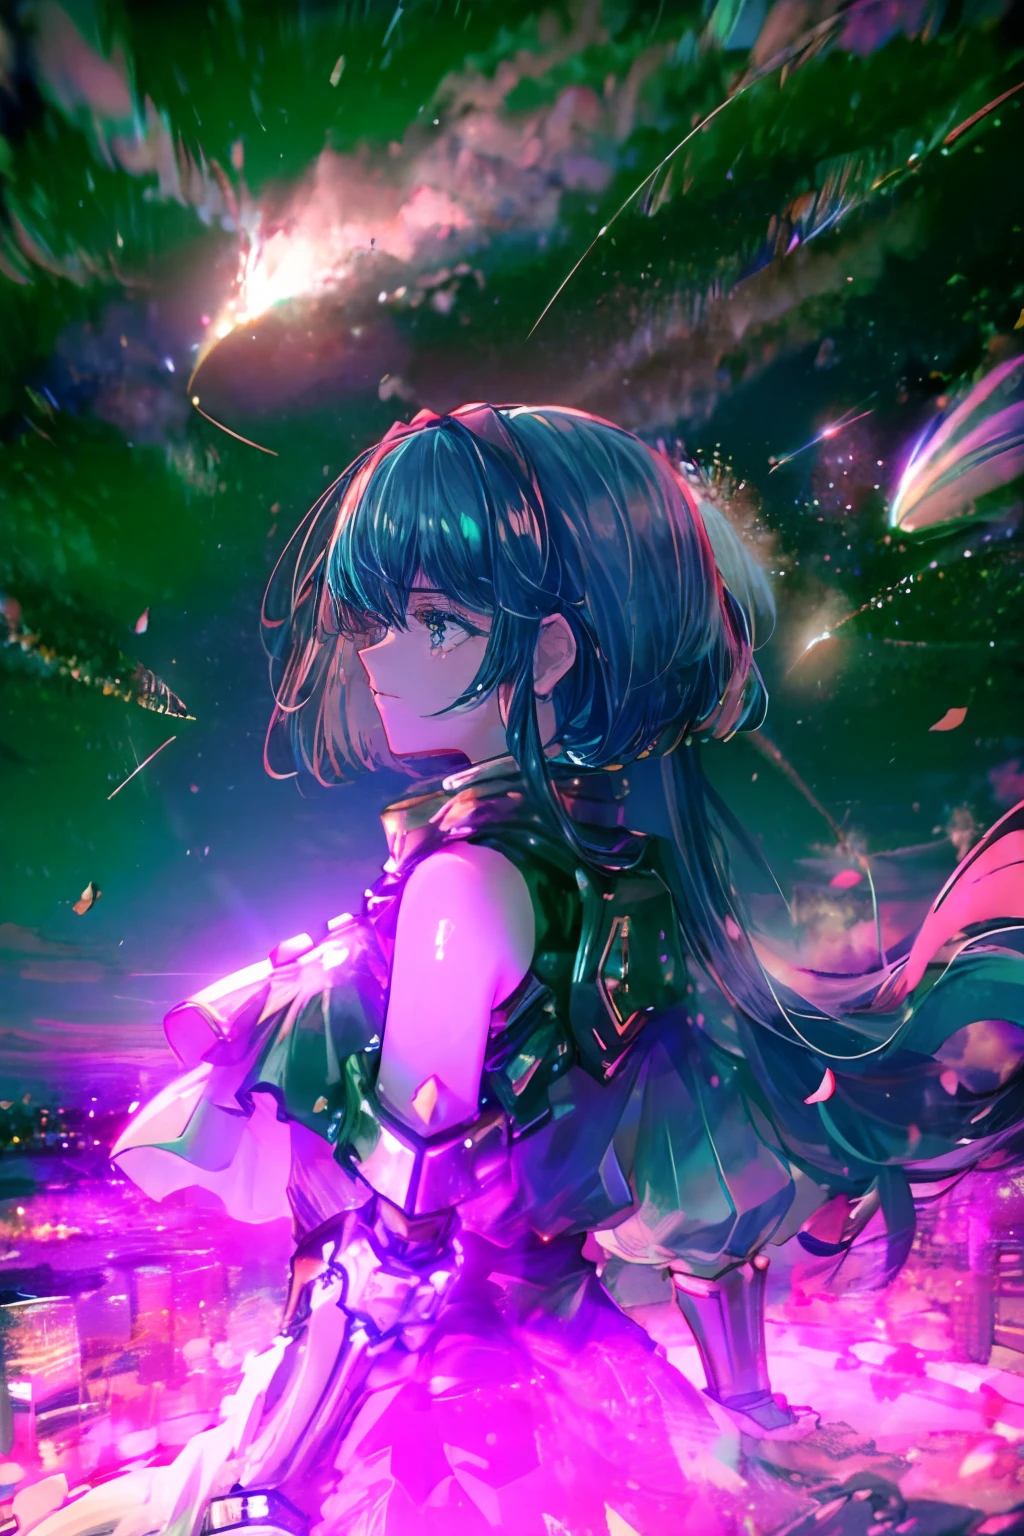 cyber punk Girl　Futuristic cities　Profile Girls 1 Girls、Girl from a distance、Wearing turquoise dress armor、Stargazing at the stars、(zoomout:1.1)、(Meteor swarm:1.2)、(comets:1.1)、low angles、from the rear、Aurora、shooting stars、Surrounded by petals、Standing in the field、top-quality、​masterpiece、​​clouds、colourfull、starrysky、stele、Teal